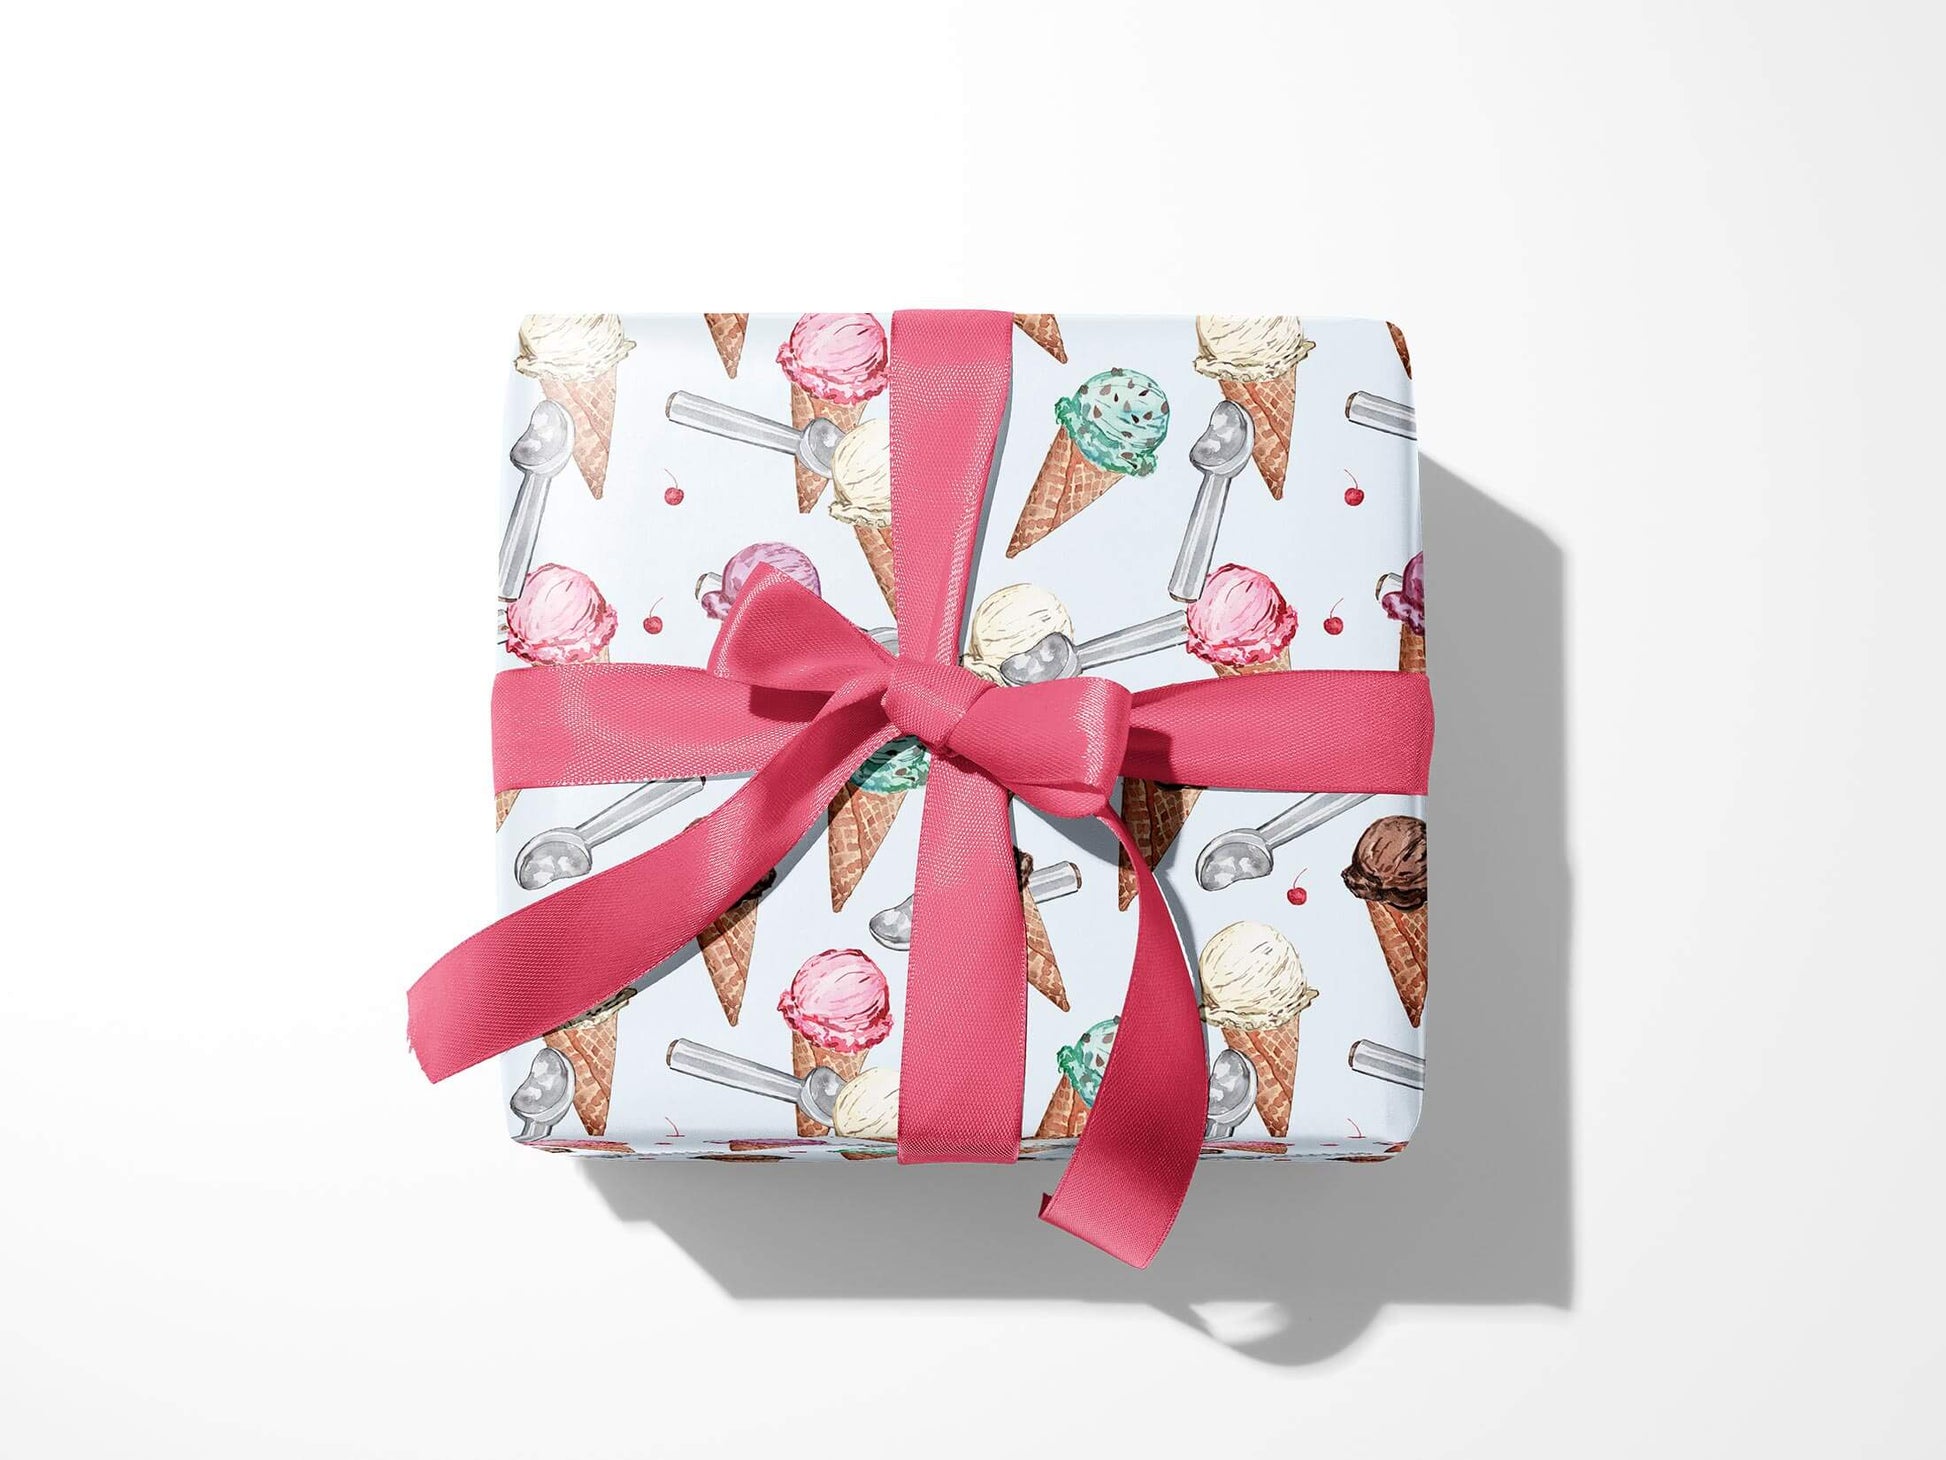 Box wrapped in ice cream wrapping paper with a pink ribbon tied in a bow 